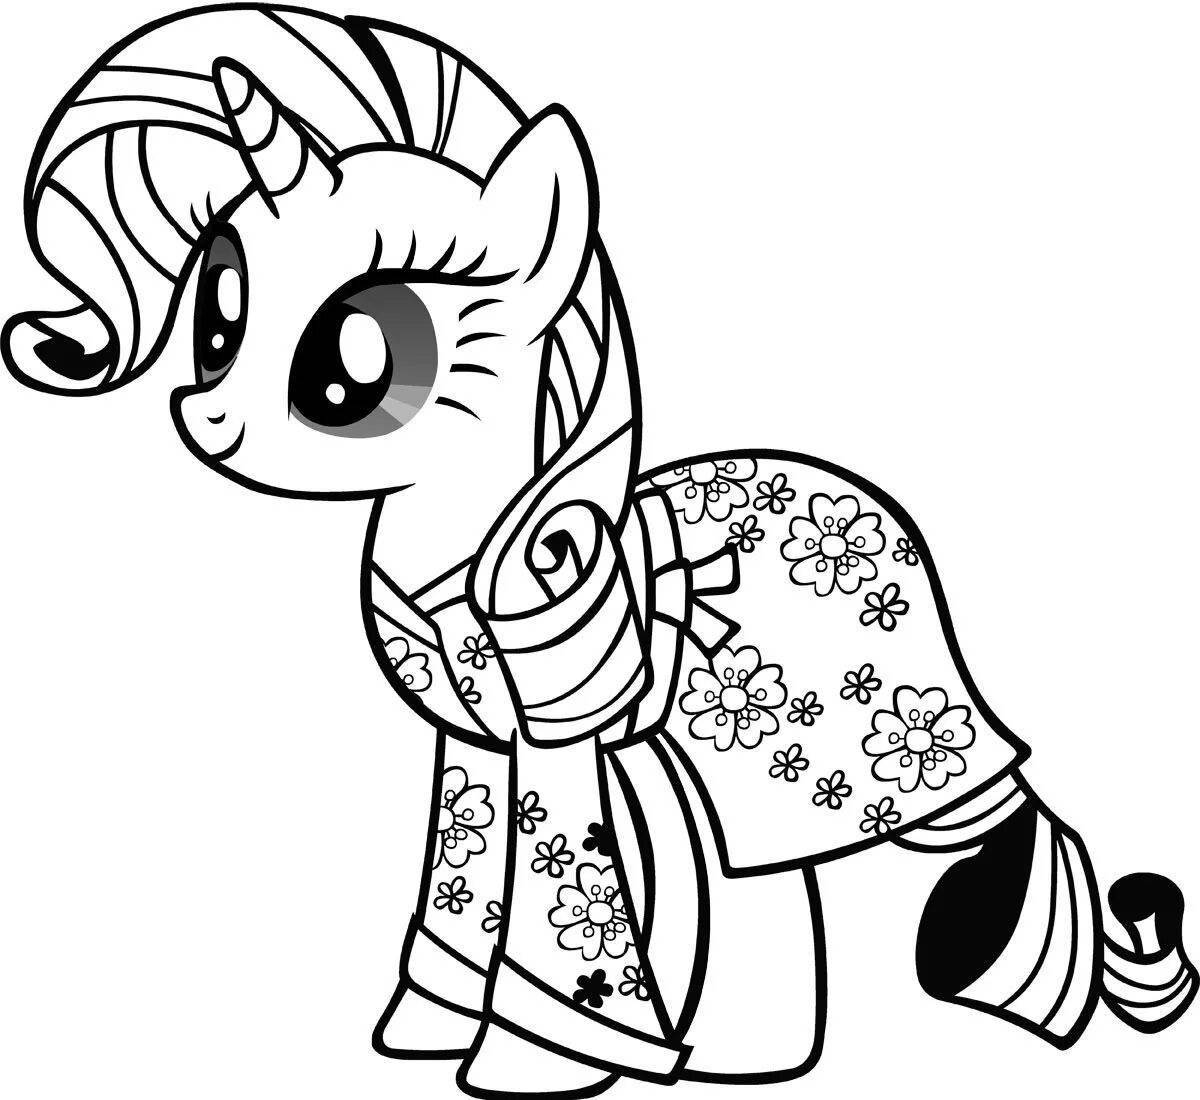 Fun coloring book for girls with ponies